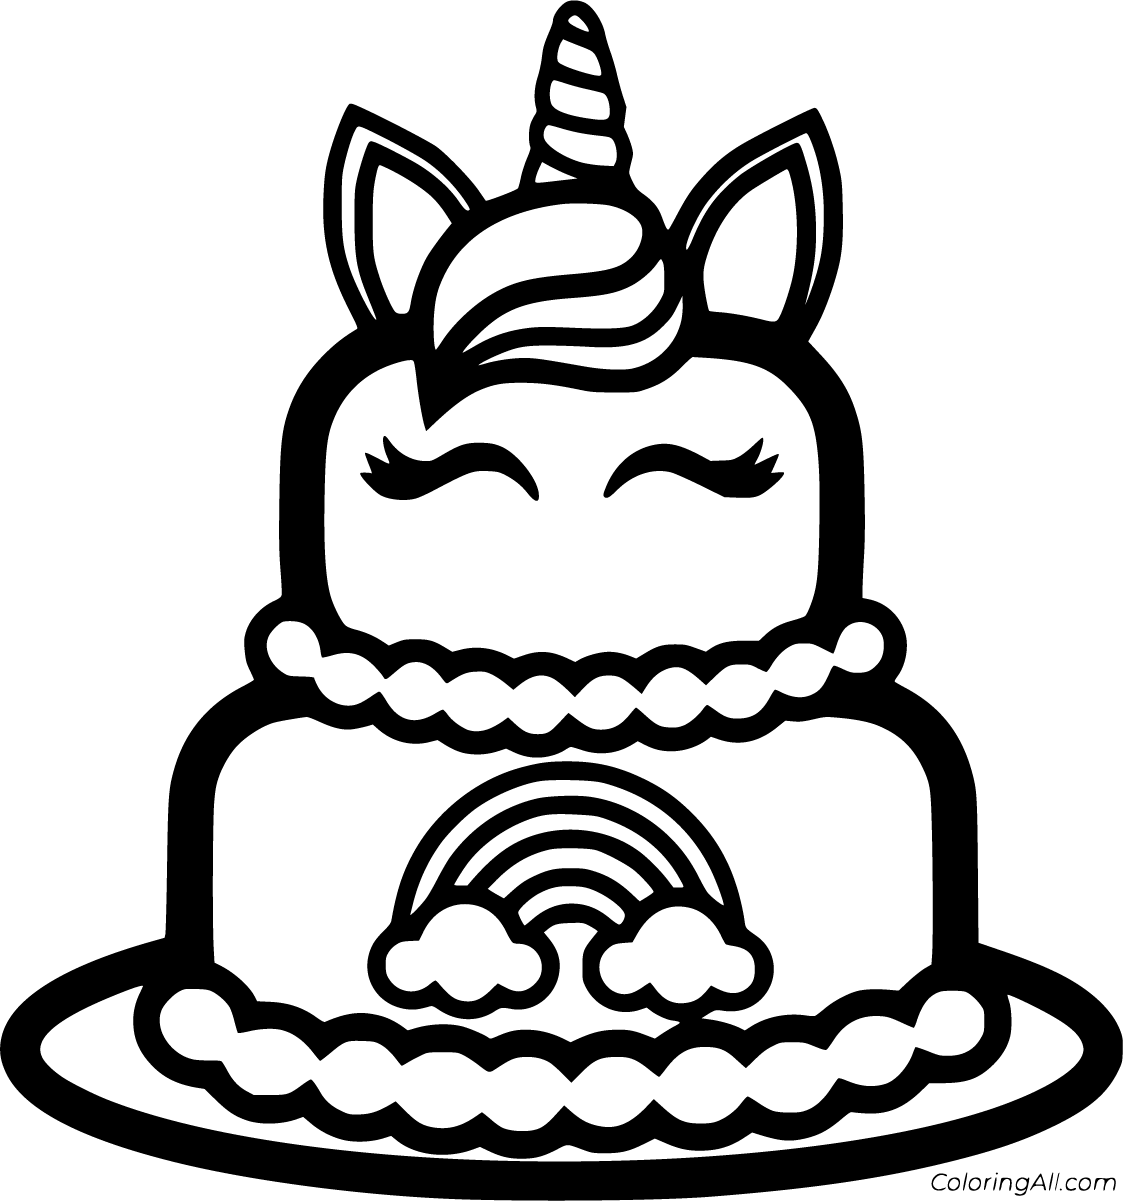 Unicorn Horse Pony Rectangle A4 or A3 Edible Icing Image Cake Topper - Etsy  Israel